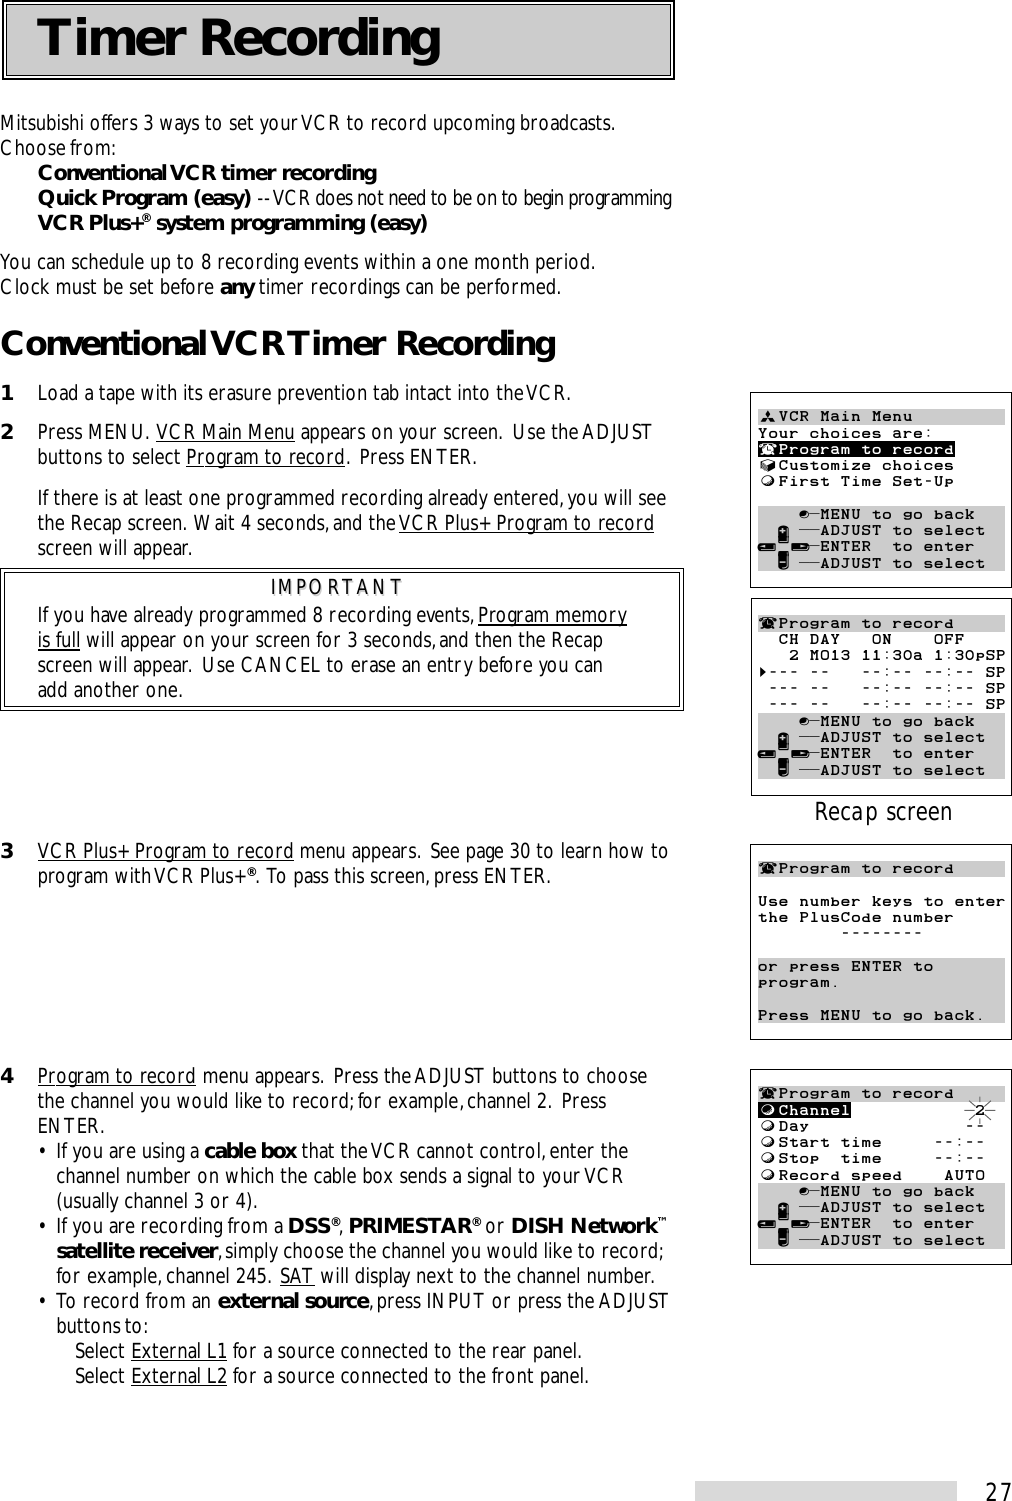 27Mitsubishi offers 3 ways to set your VCR to record upcoming broadcasts.Choose from:Conventional VCR timer recordingQuick Program (easy) -- VCR does not need to be on to begin programmingVCR Plus+® system programming (easy)You can schedule up to 8 recording events within a one month period.Clock must be set before any timer recordings can be performed.Conventional VCR Timer Recording1Load a tape with its erasure prevention tab intact into the VCR.2Press MENU.  VCR Main Menu appears on your screen.  Use the ADJUSTbuttons to select Program to record.  Press ENTER.If there is at least one programmed recording already entered, you will seethe Recap screen.  Wait 4 seconds, and the VCR Plus+ Program to recordscreen will appear.IMPORTANTIMPORTANTIf you have already programmed 8 recording events, Program memoryis full will appear on your screen for 3 seconds, and then the Recapscreen will appear.  Use CANCEL to erase an entry before you canadd another one.3VCR Plus+ Program to record menu appears.  See page 30 to learn how toprogram with VCR Plus+®.  To pass this screen, press ENTER.4Program to record menu appears.  Press the ADJUST buttons to choosethe channel you would like to record; for example, channel 2.  PressENTER.• If you are using a cable box that the VCR cannot control, enter thechannel number on which the cable box sends a signal to your VCR(usually channel 3 or 4).• If you are recording from a DSS®, PRIMESTAR® or DISH Network™satellite receiver, simply choose the channel you would like to record;for example, channel 245.  SAT will display next to the channel number.• To record from an external source, press INPUT or press the ADJUSTbuttons to:Select External L1 for a source connected to the rear panel.Select External L2 for a source connected to the front panel.ªVCR Main MenuYour choices are:¬Program to record√Customize choicesƒFirst Time Set-Up    ∫πMENU to go back  ∂ ππADJUST to select≤¥≥πENTER  to enter  ∑ ππADJUST to select¬Program to recordUse number keys to enterthe PlusCode number        --------or press ENTER toprogram.Press MENU to go back.¬Program to recordƒChannel            2ƒDay               --ƒStart time     --:--ƒStop  time     --:--ƒRecord speed    AUTO    ∫πMENU to go back  ∂ ππADJUST to select≤¥≥πENTER  to enter  ∑ ππADJUST to select¬Program to record  CH DAY   ON    OFF   2 MO13 11:30a 1:30pSP§--- --   --:-- --:-- SP --- --   --:-- --:-- SP --- --   --:-- --:-- SP    ∫πMENU to go back  ∂ ππADJUST to select≤¥≥πENTER  to enter  ∑ ππADJUST to selectRecap screenTimer Recording